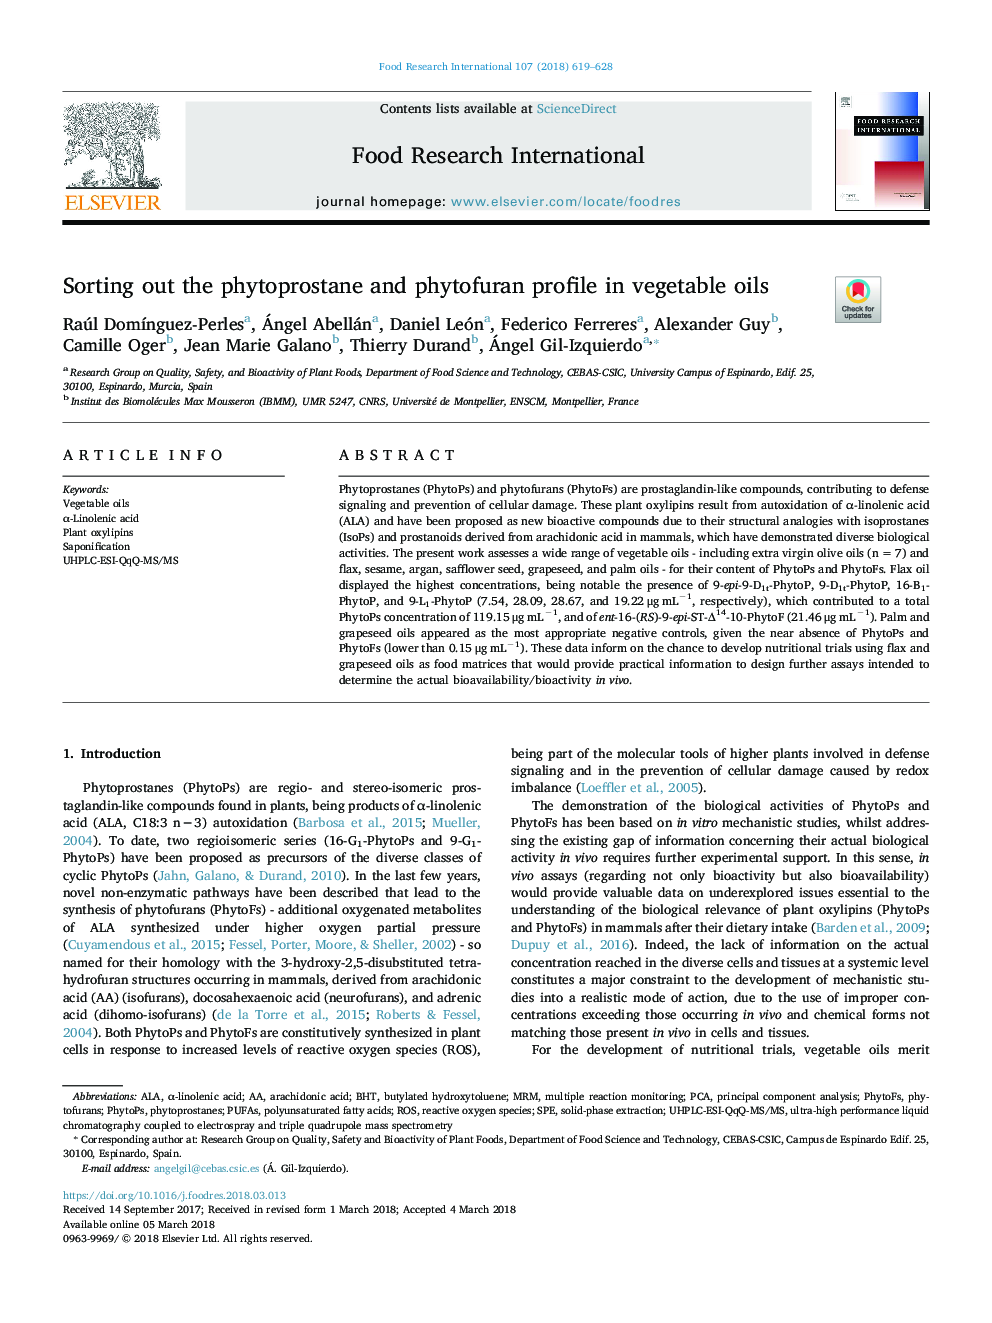 Sorting out the phytoprostane and phytofuran profile in vegetable oils